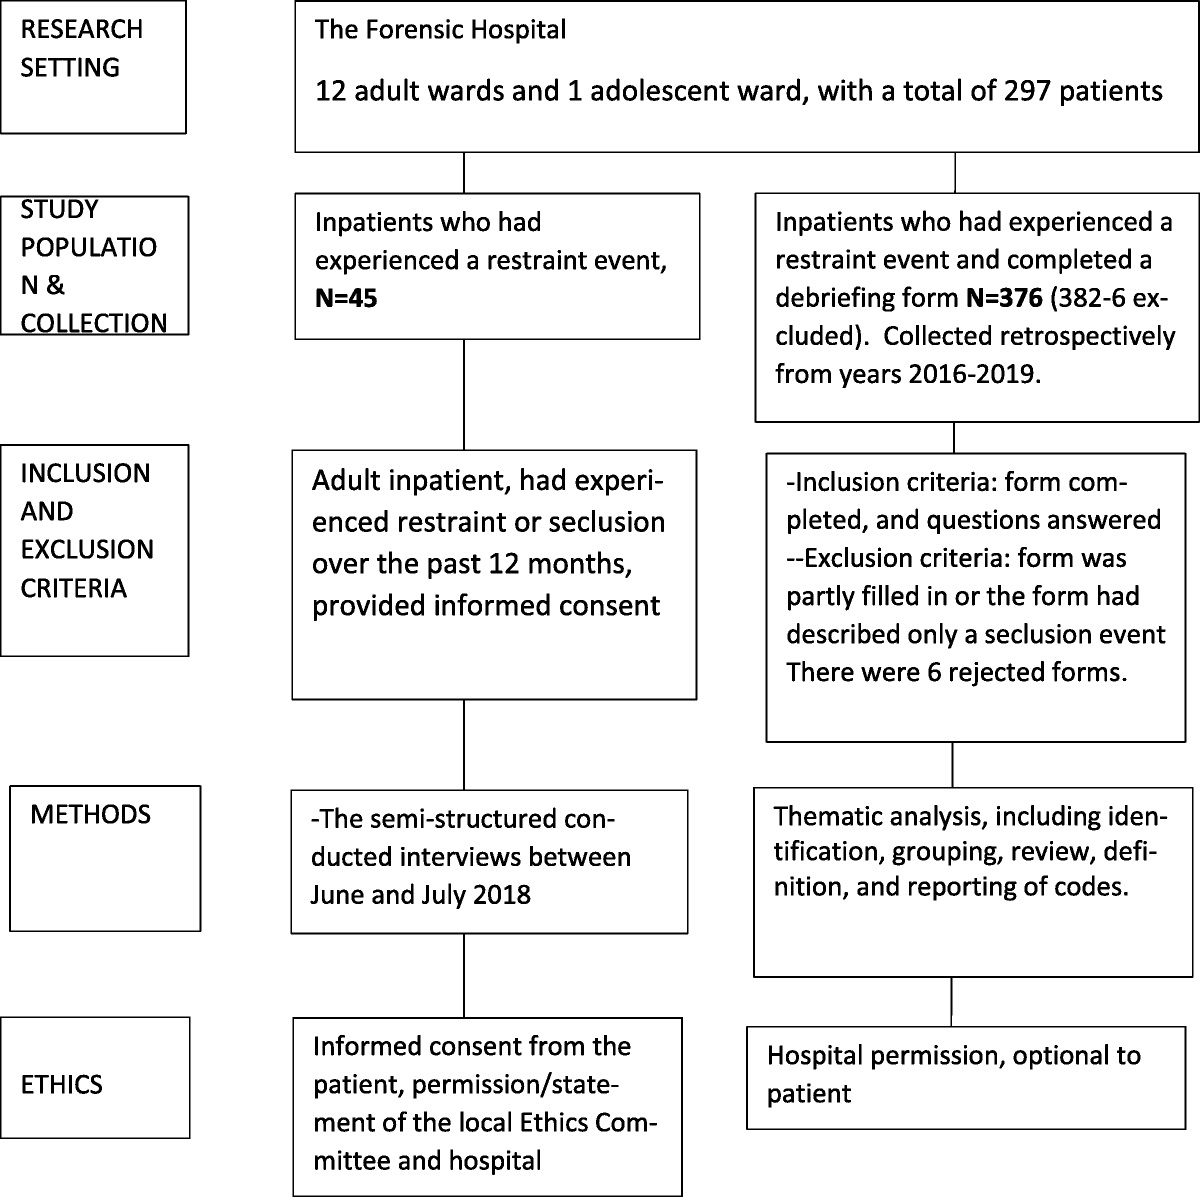 Patients’ Perceptions of Safety and Debriefing in Forensic Mental Health Care in Finland